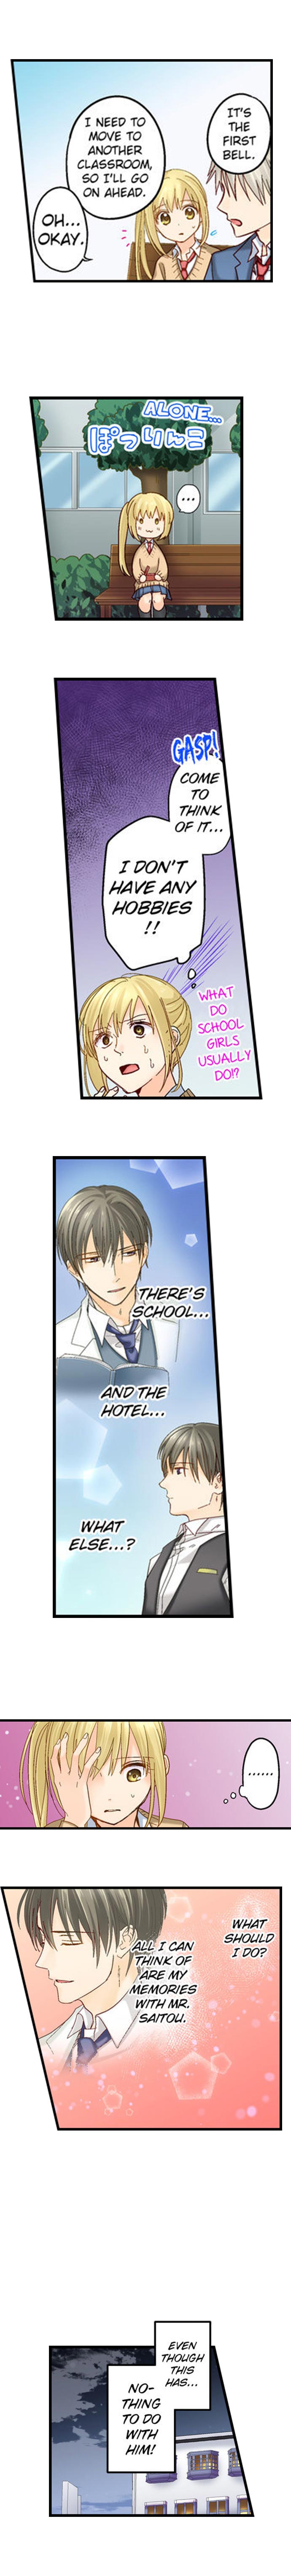 Running a Love Hotel with My Math Teacher - Chapter 29 Page 4